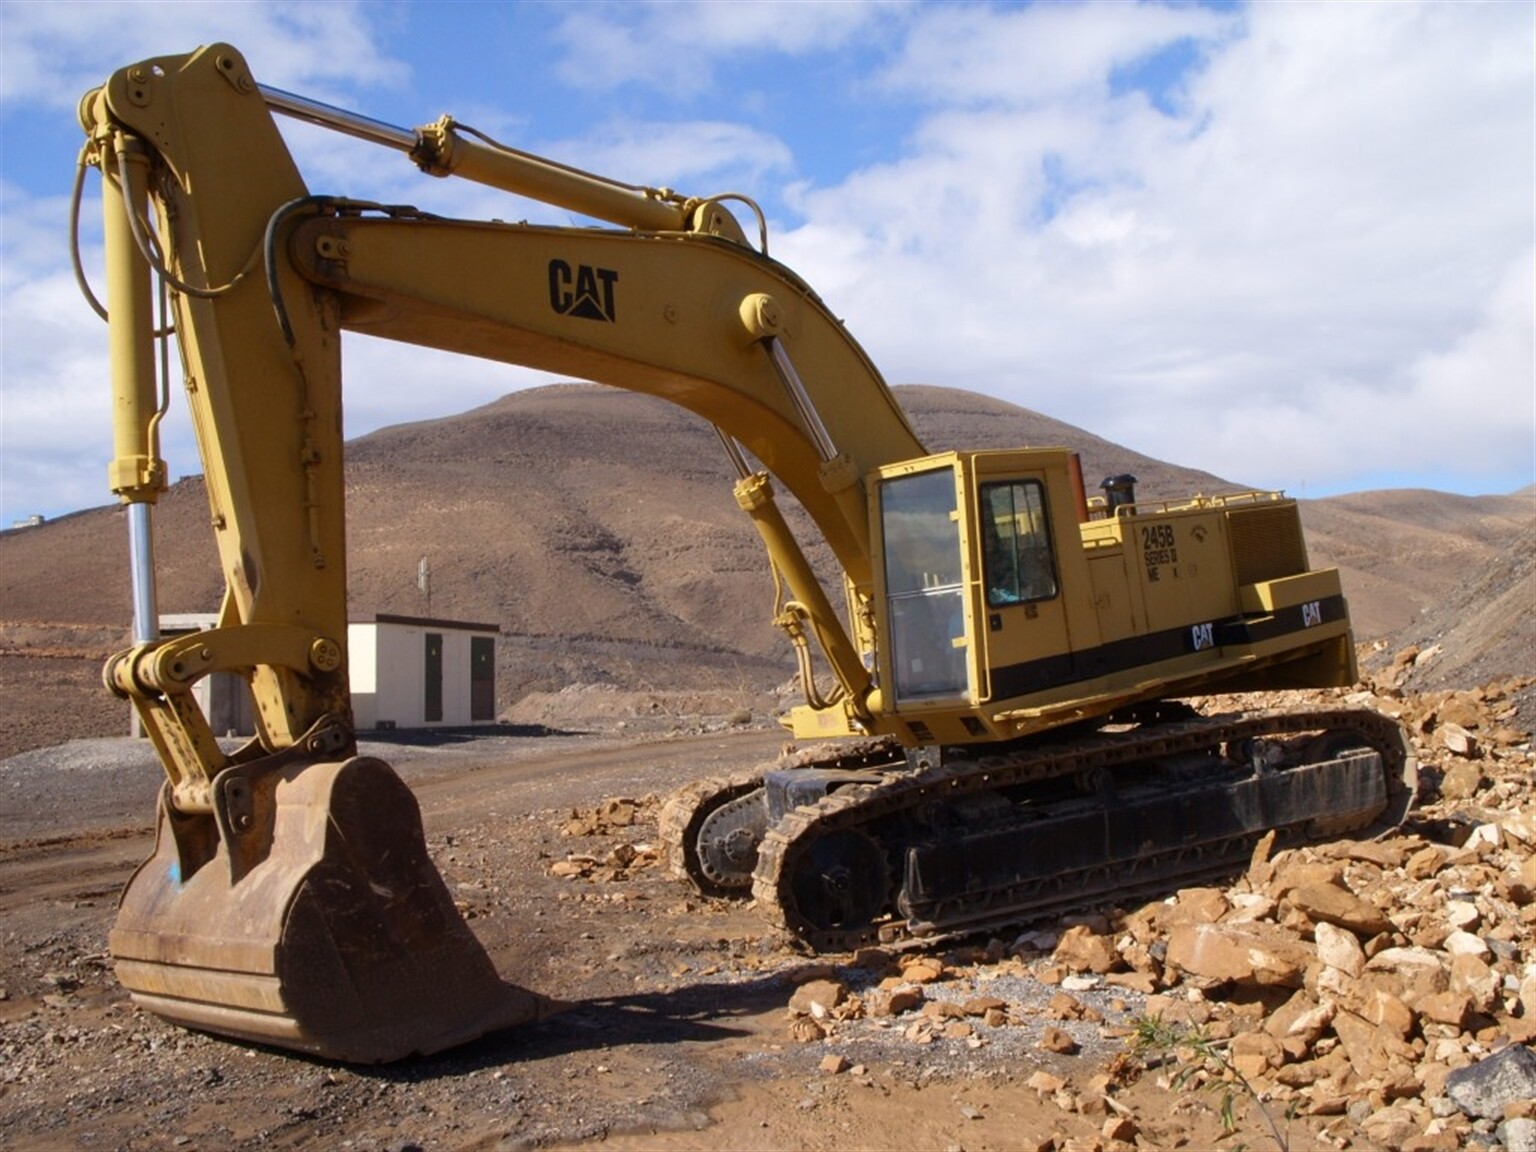 The Cat 245 a legendary excavator (Blog Post Re-Visited)